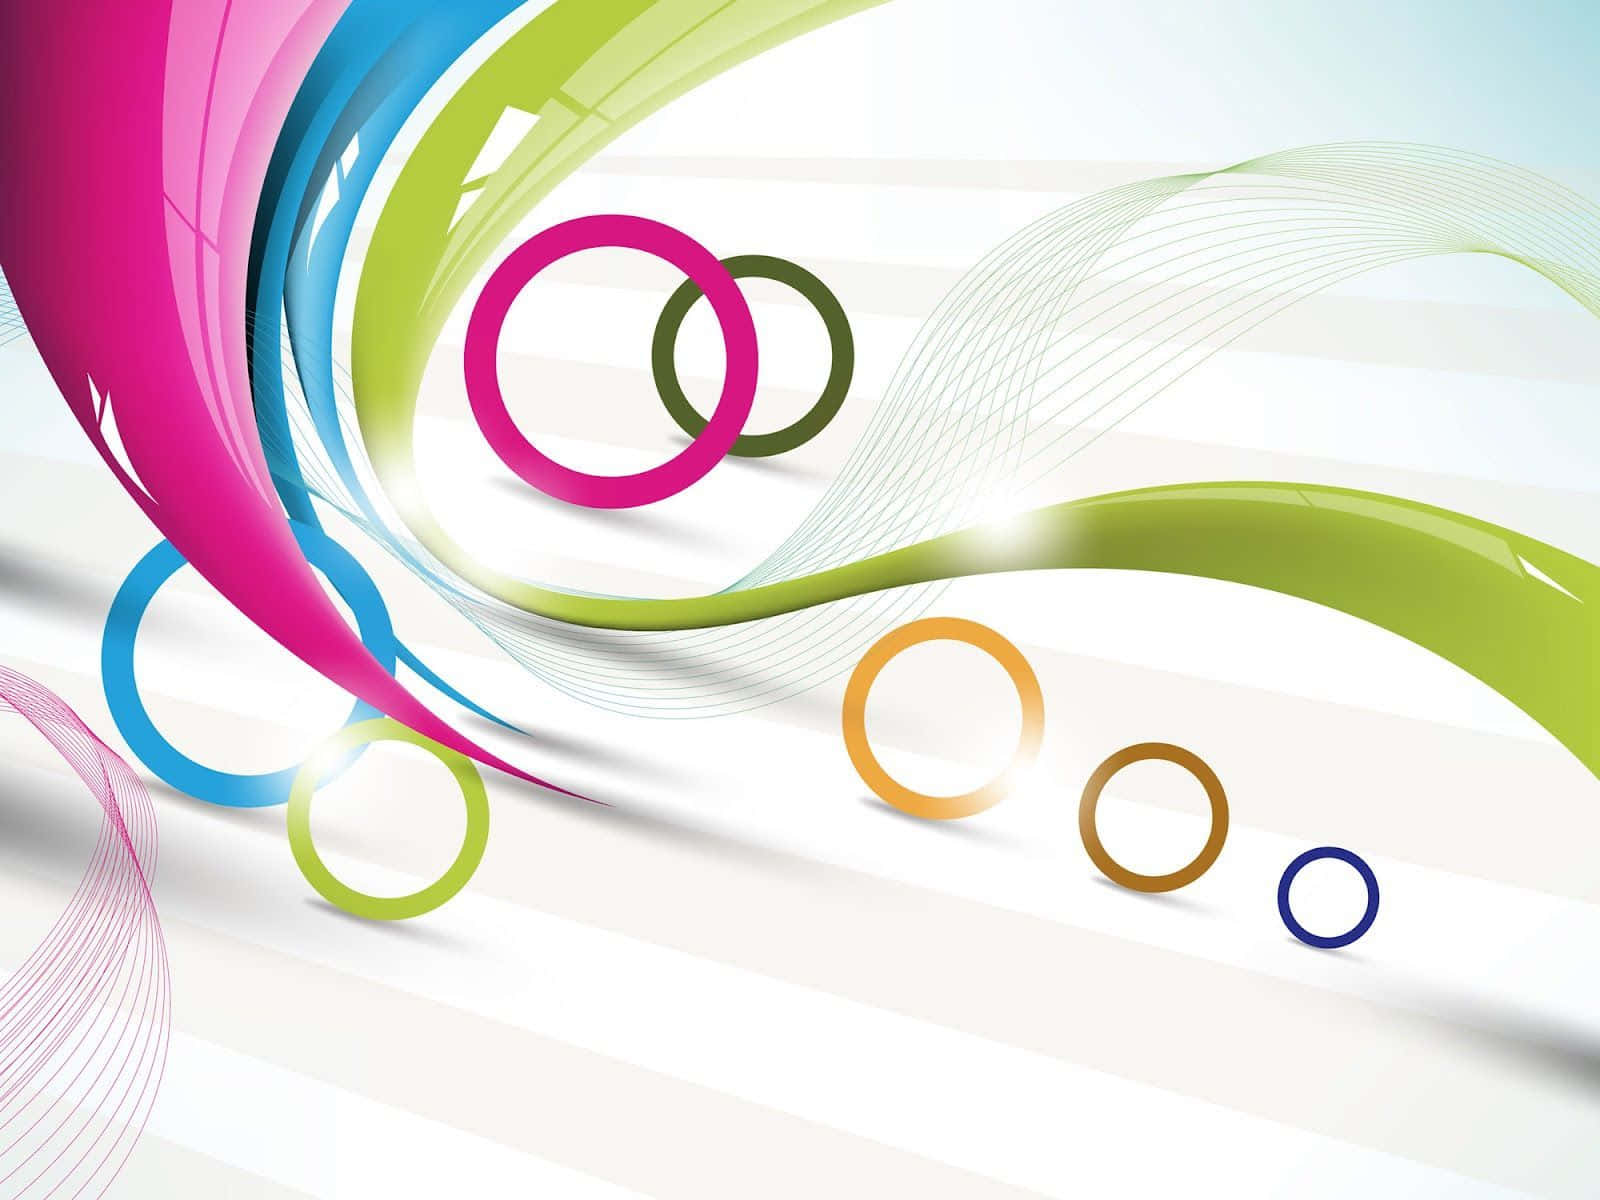 Colorful Circles And Swirls Vector Background